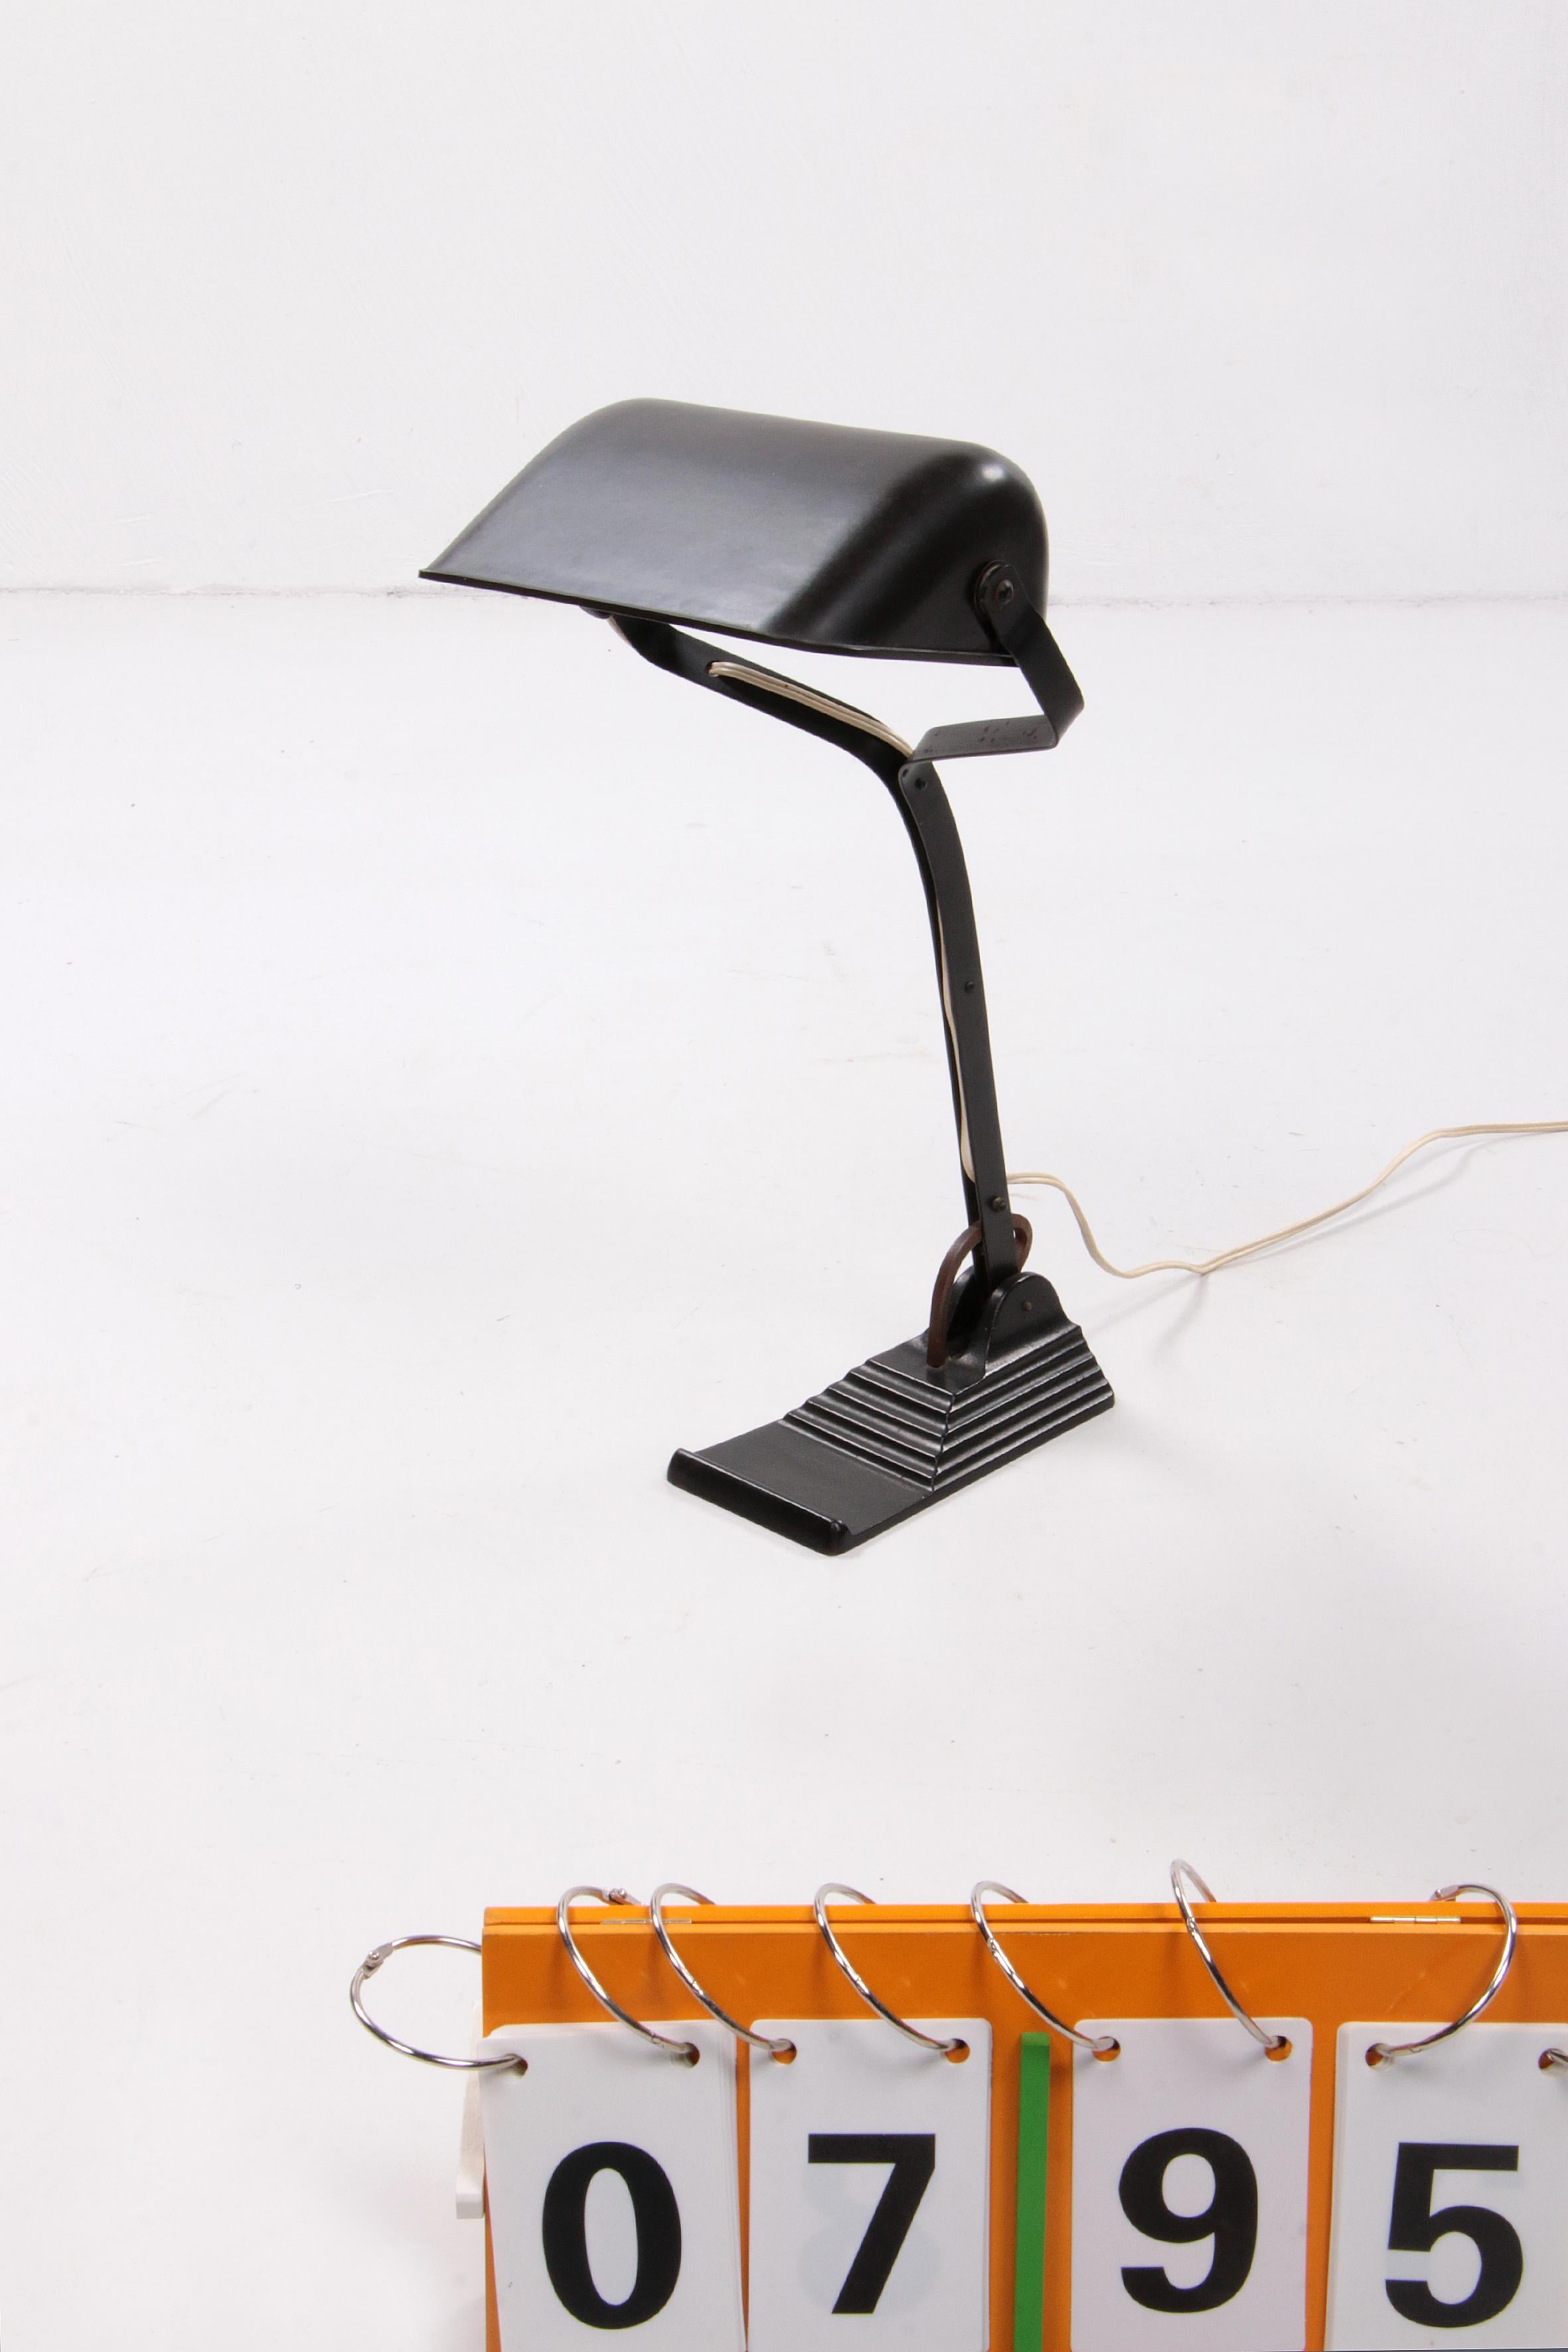 Mid-Century Modern Art Deco desk lamp also called (notary lamp) made by Erpe Belgium. For Sale